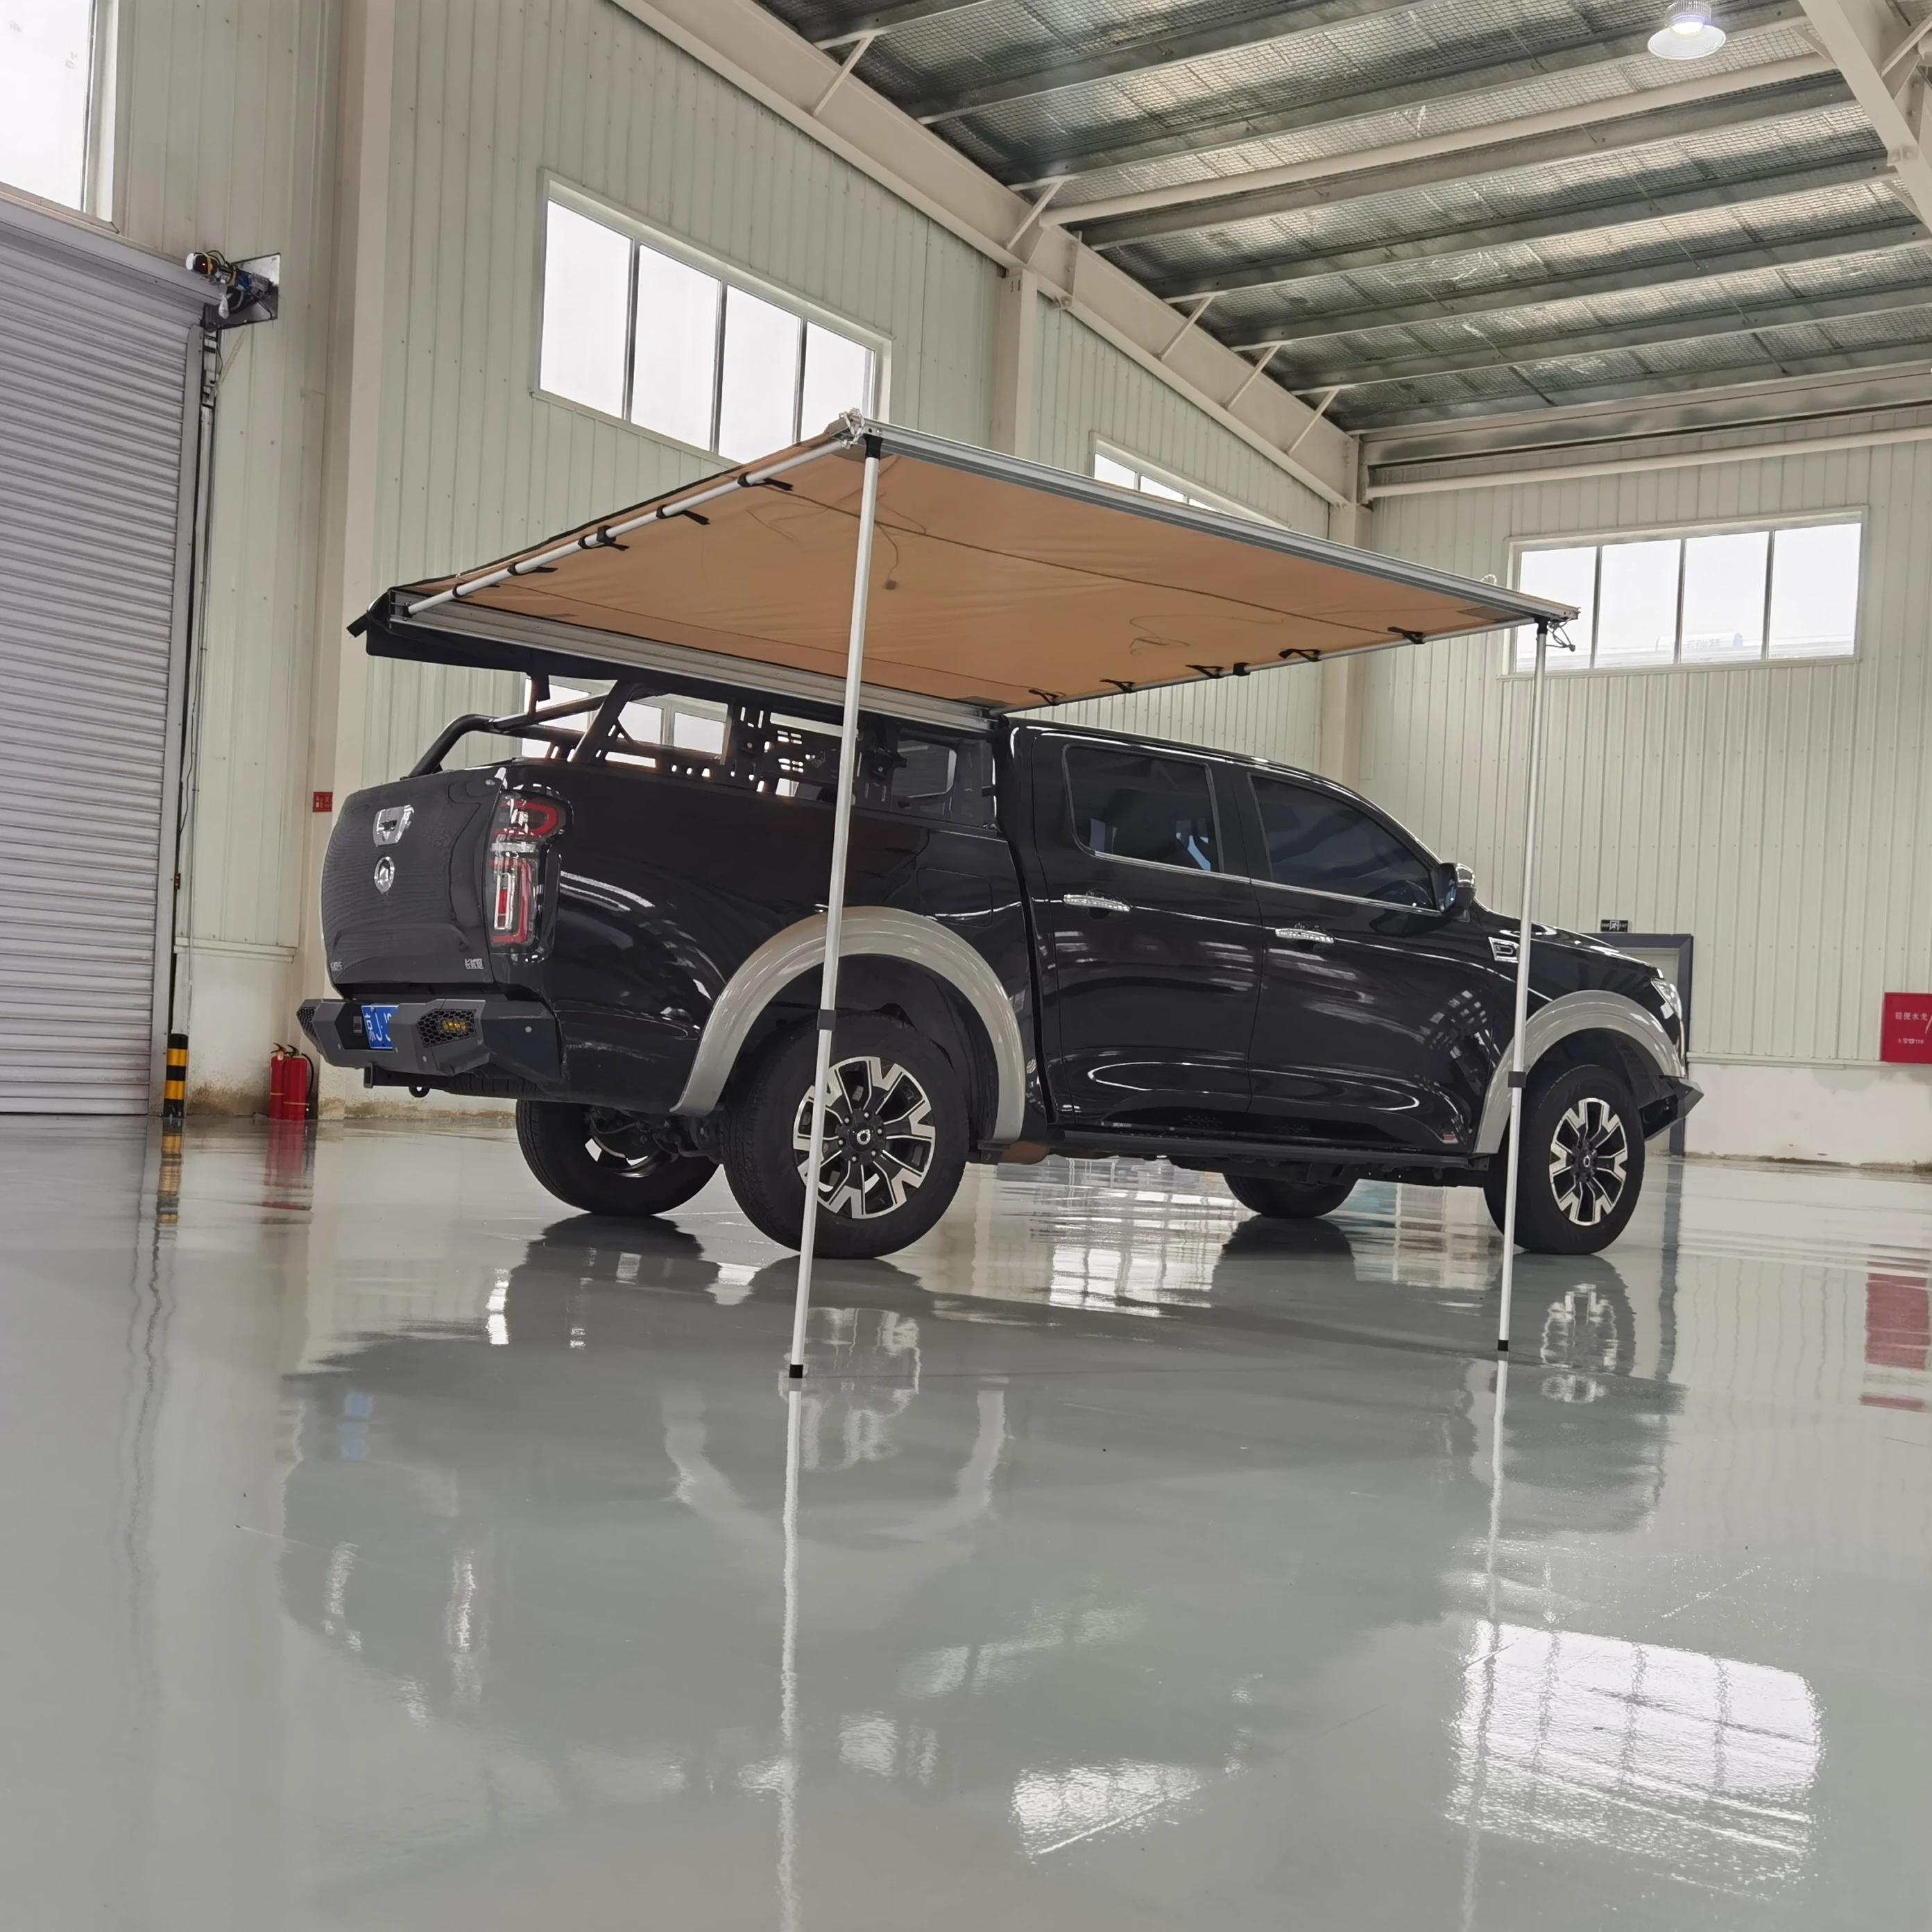 

High quality 4x4 offroad car side awning, Beige/tan, grey, green, coffee color, also can be customized